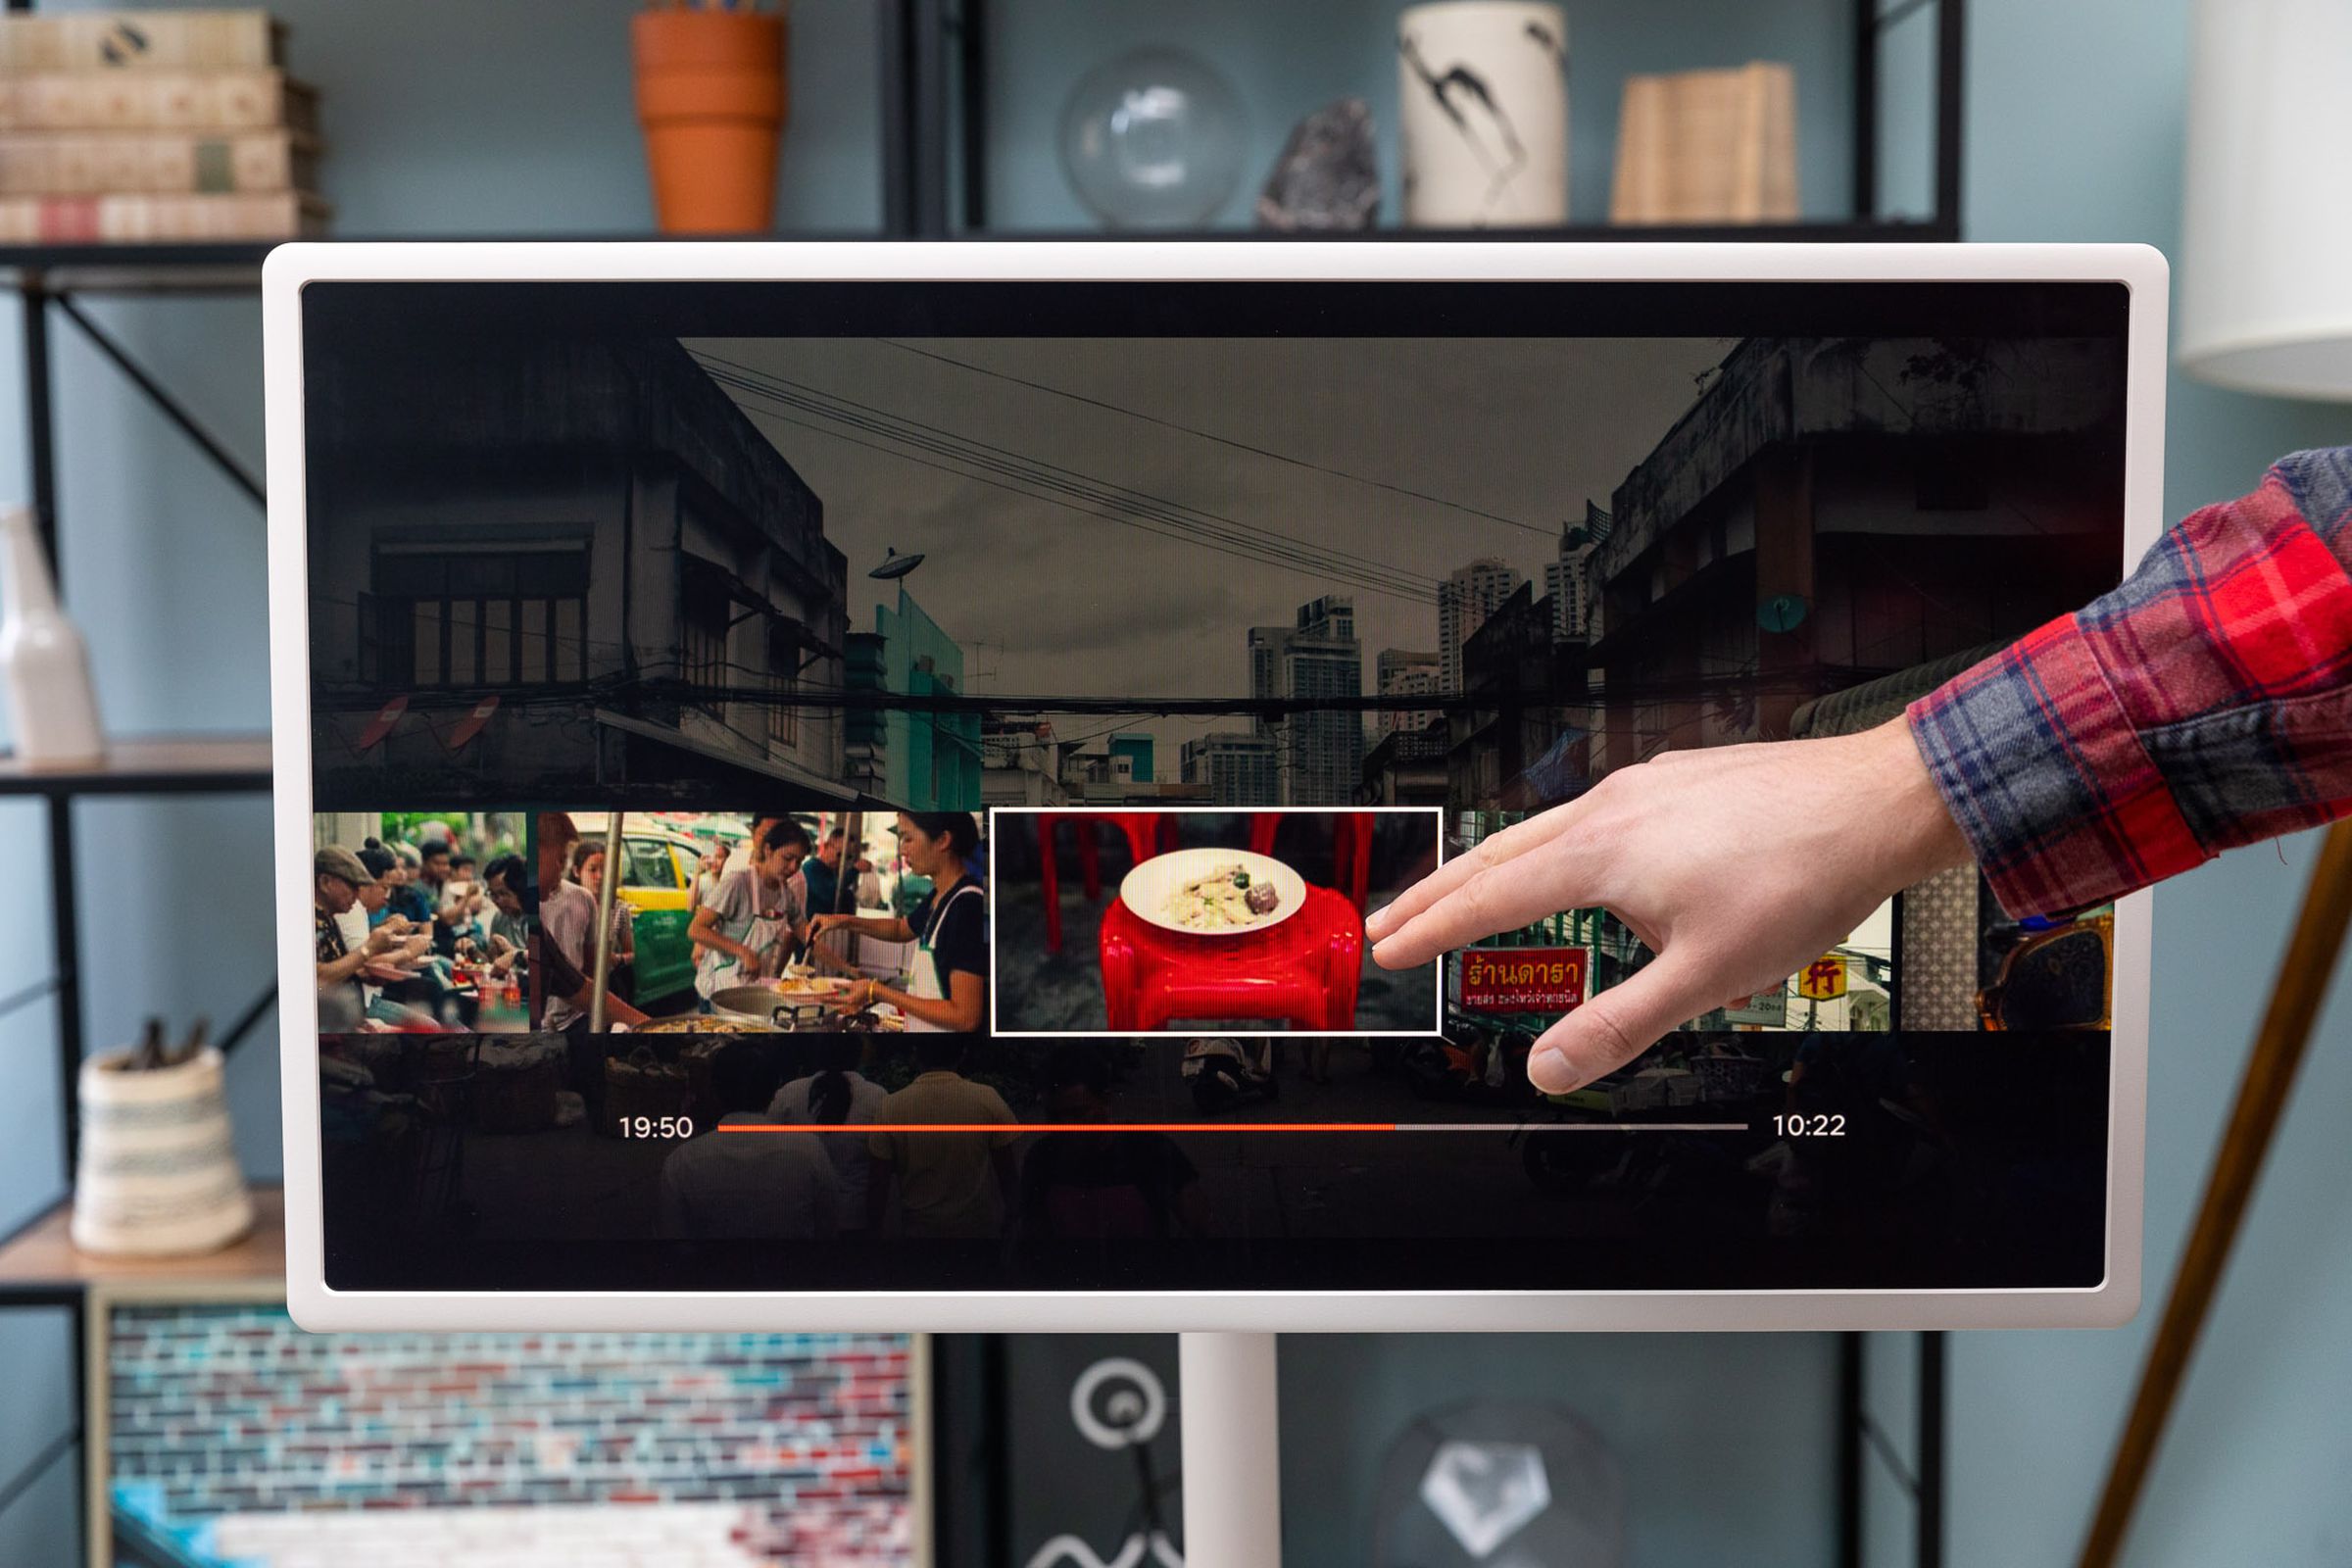 LG’s StanbyME TV showing Netflix, with the author using his fingers to navigate through an episode of a cooking show.